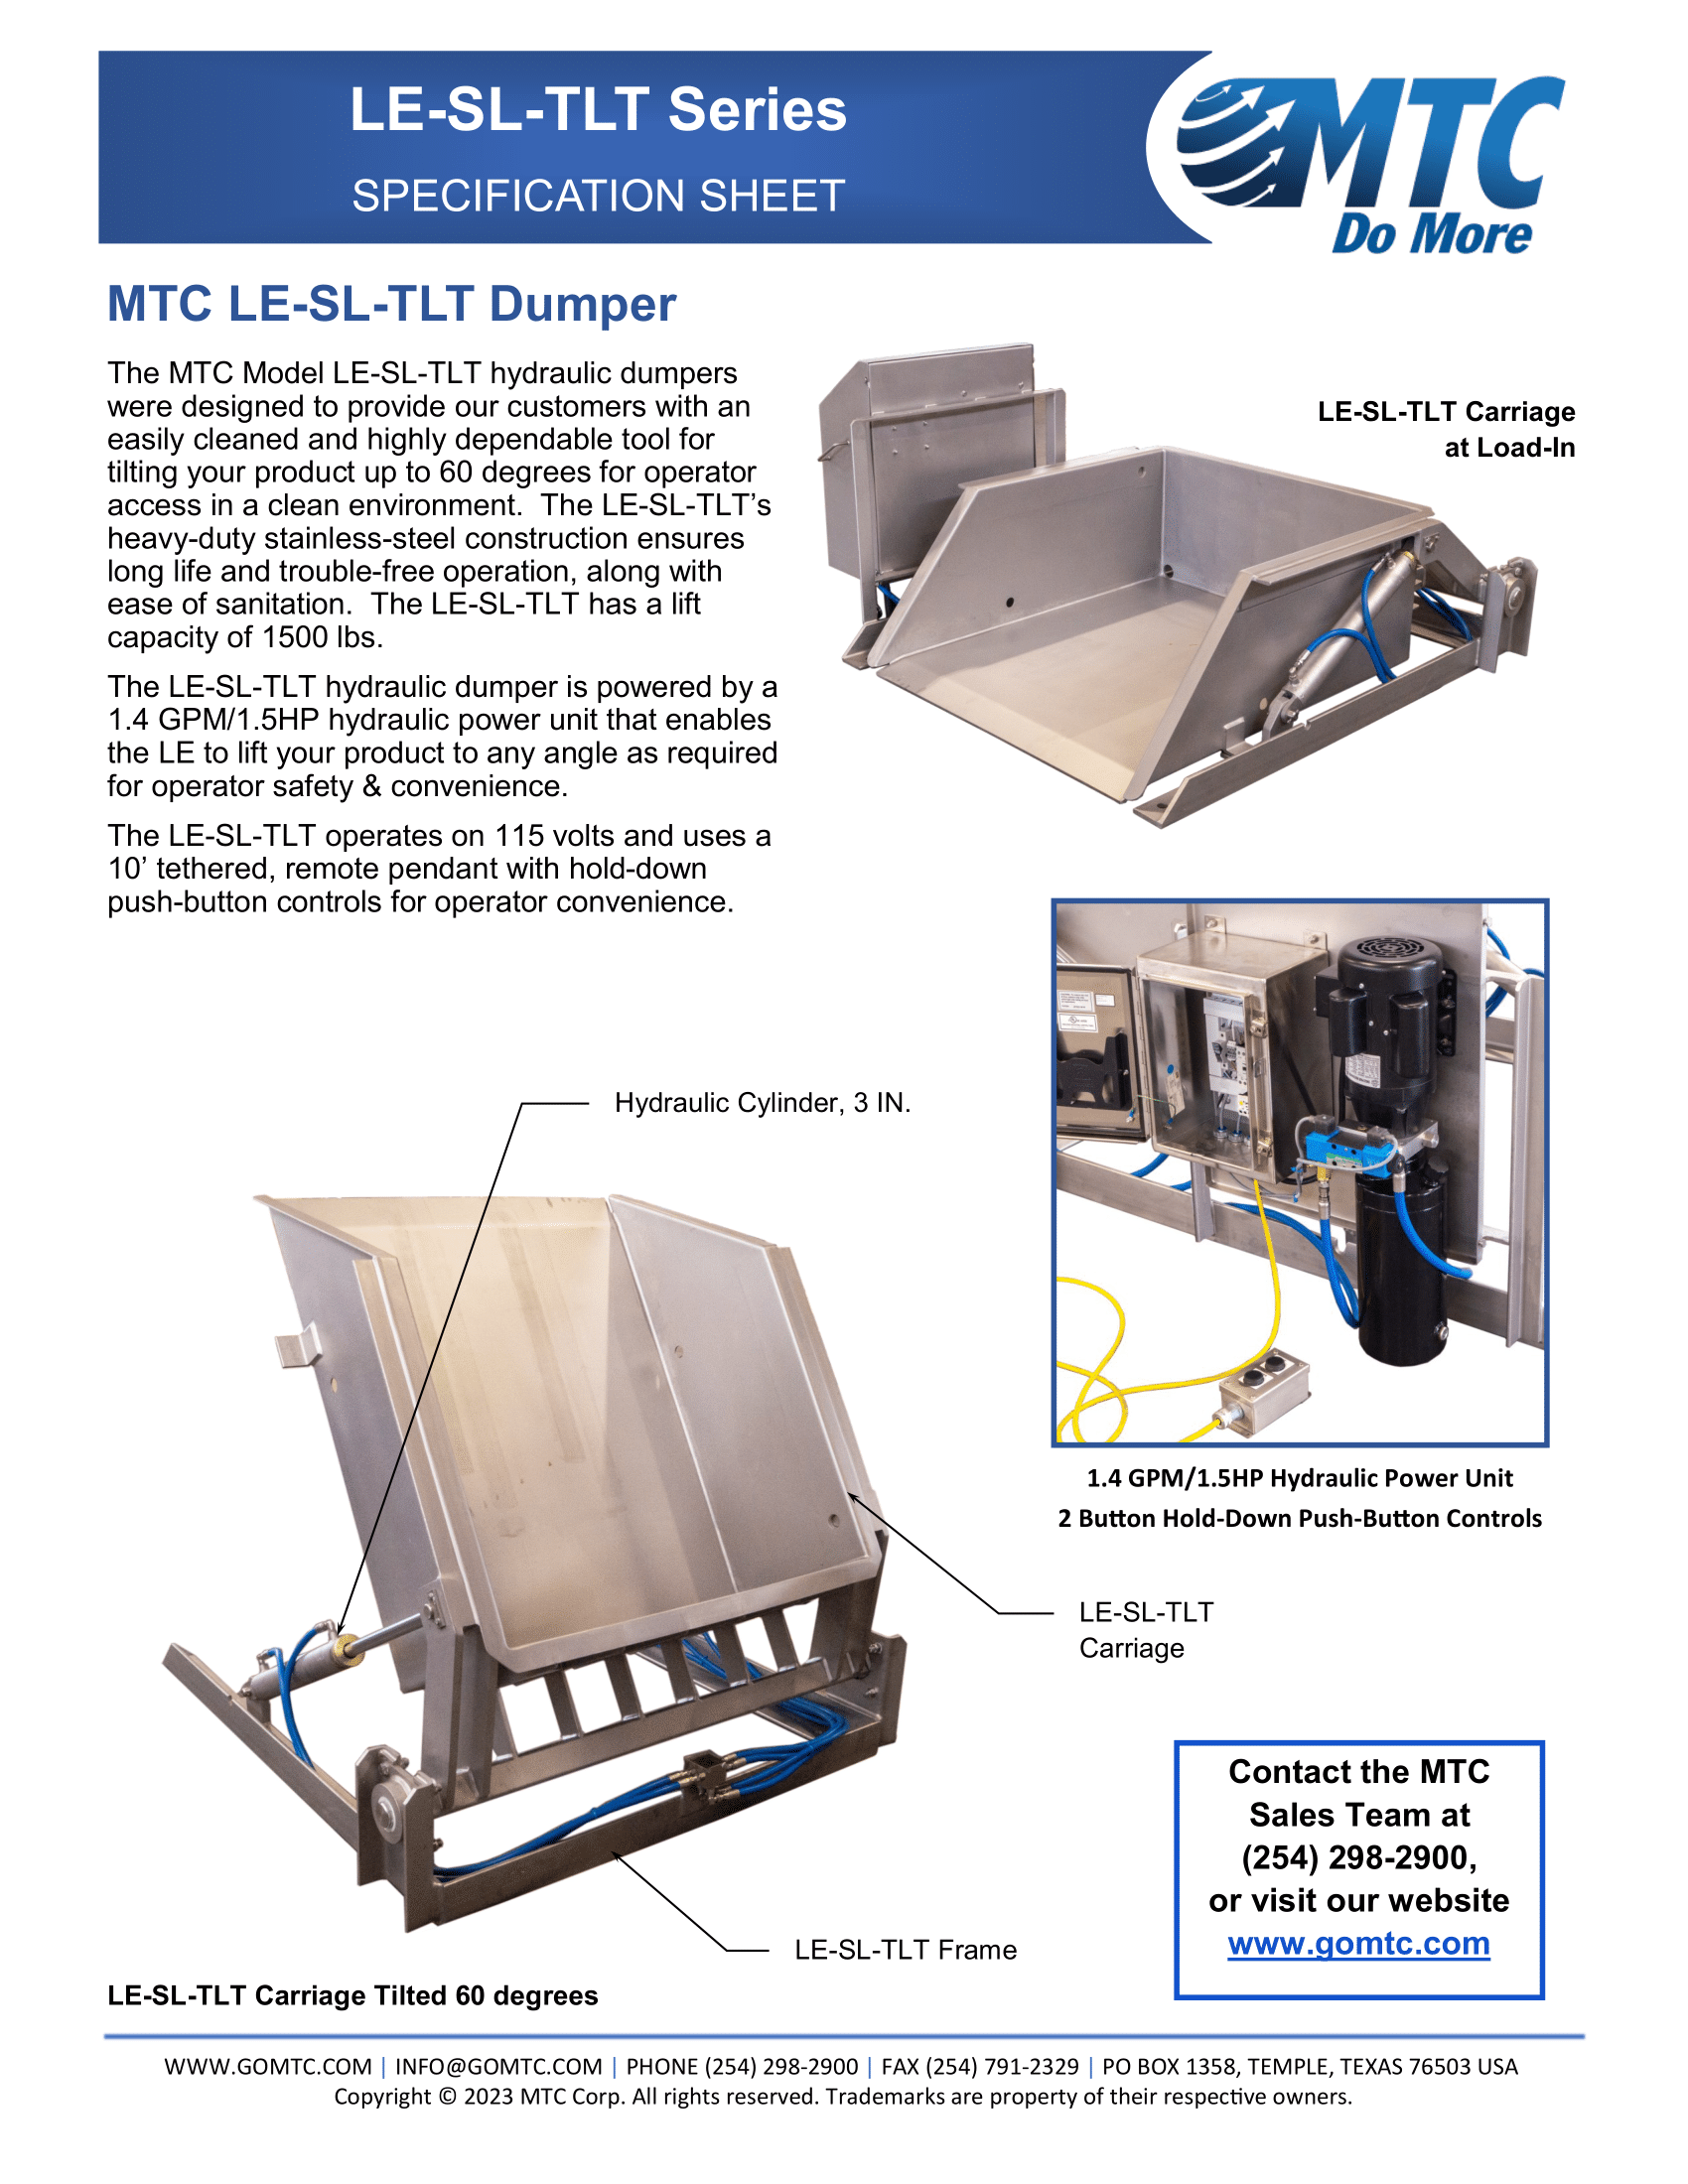 MTC Brochure for the lift and tilt hydraulic dumper - front cover